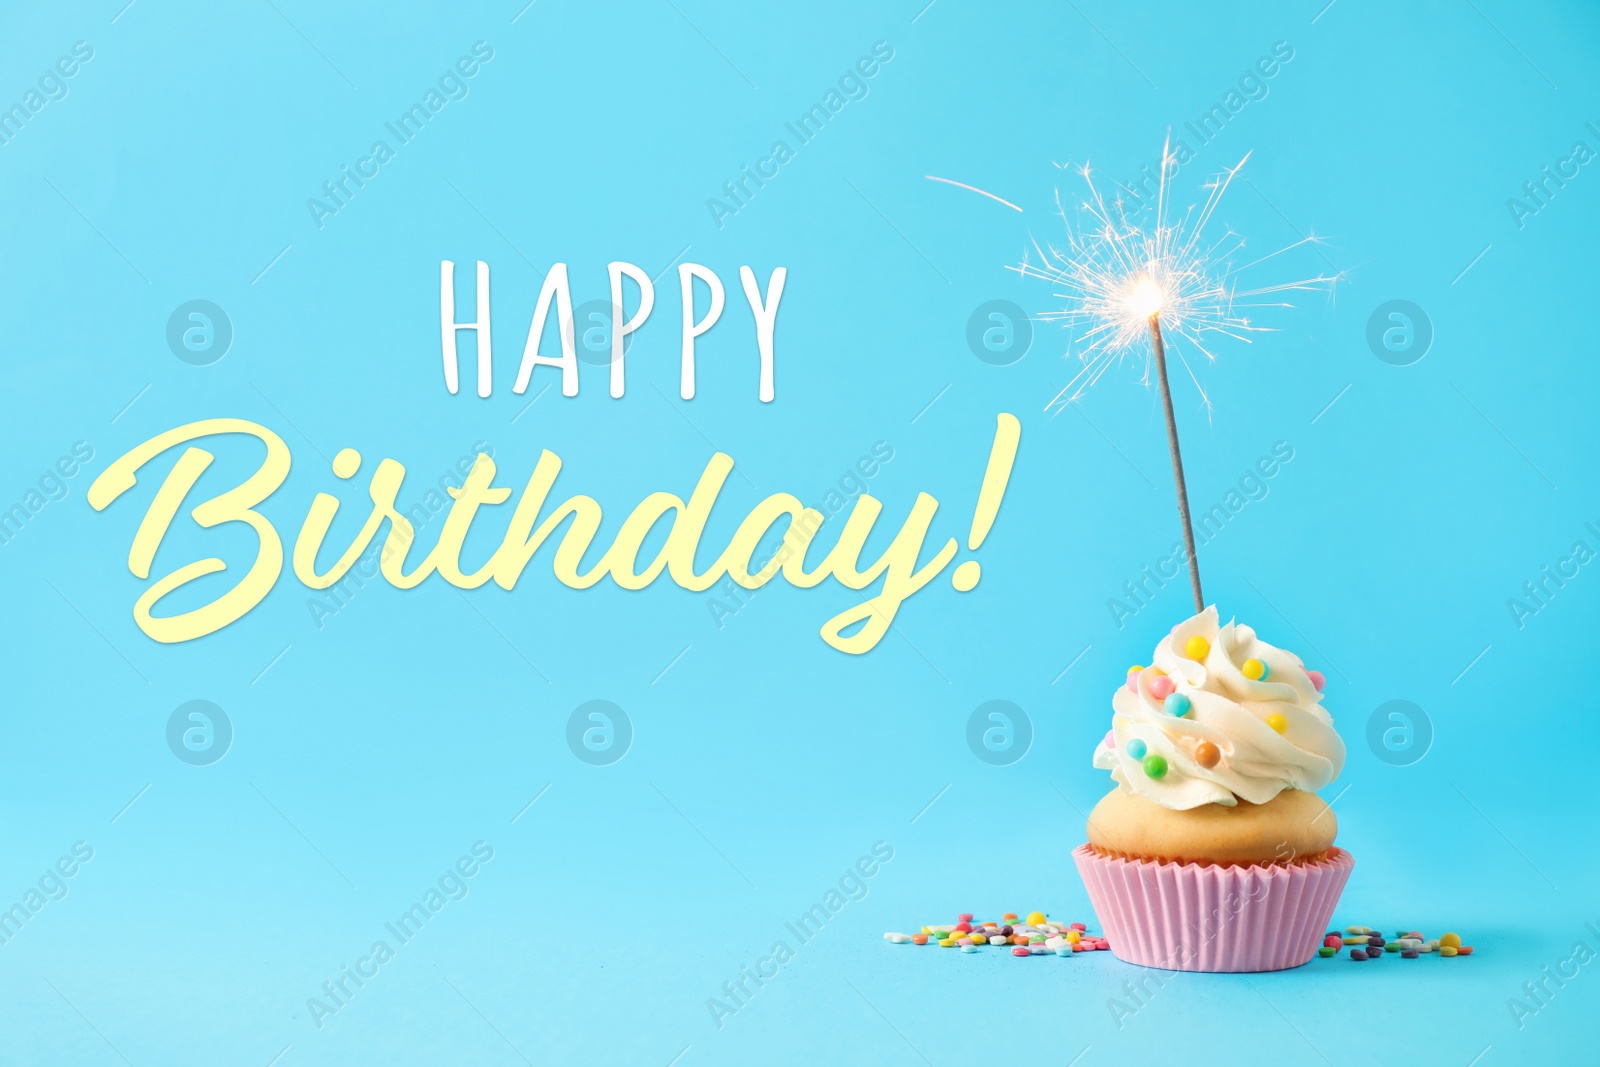 Image of Happy Birthday! Delicious cupcake with sparkler on light blue background